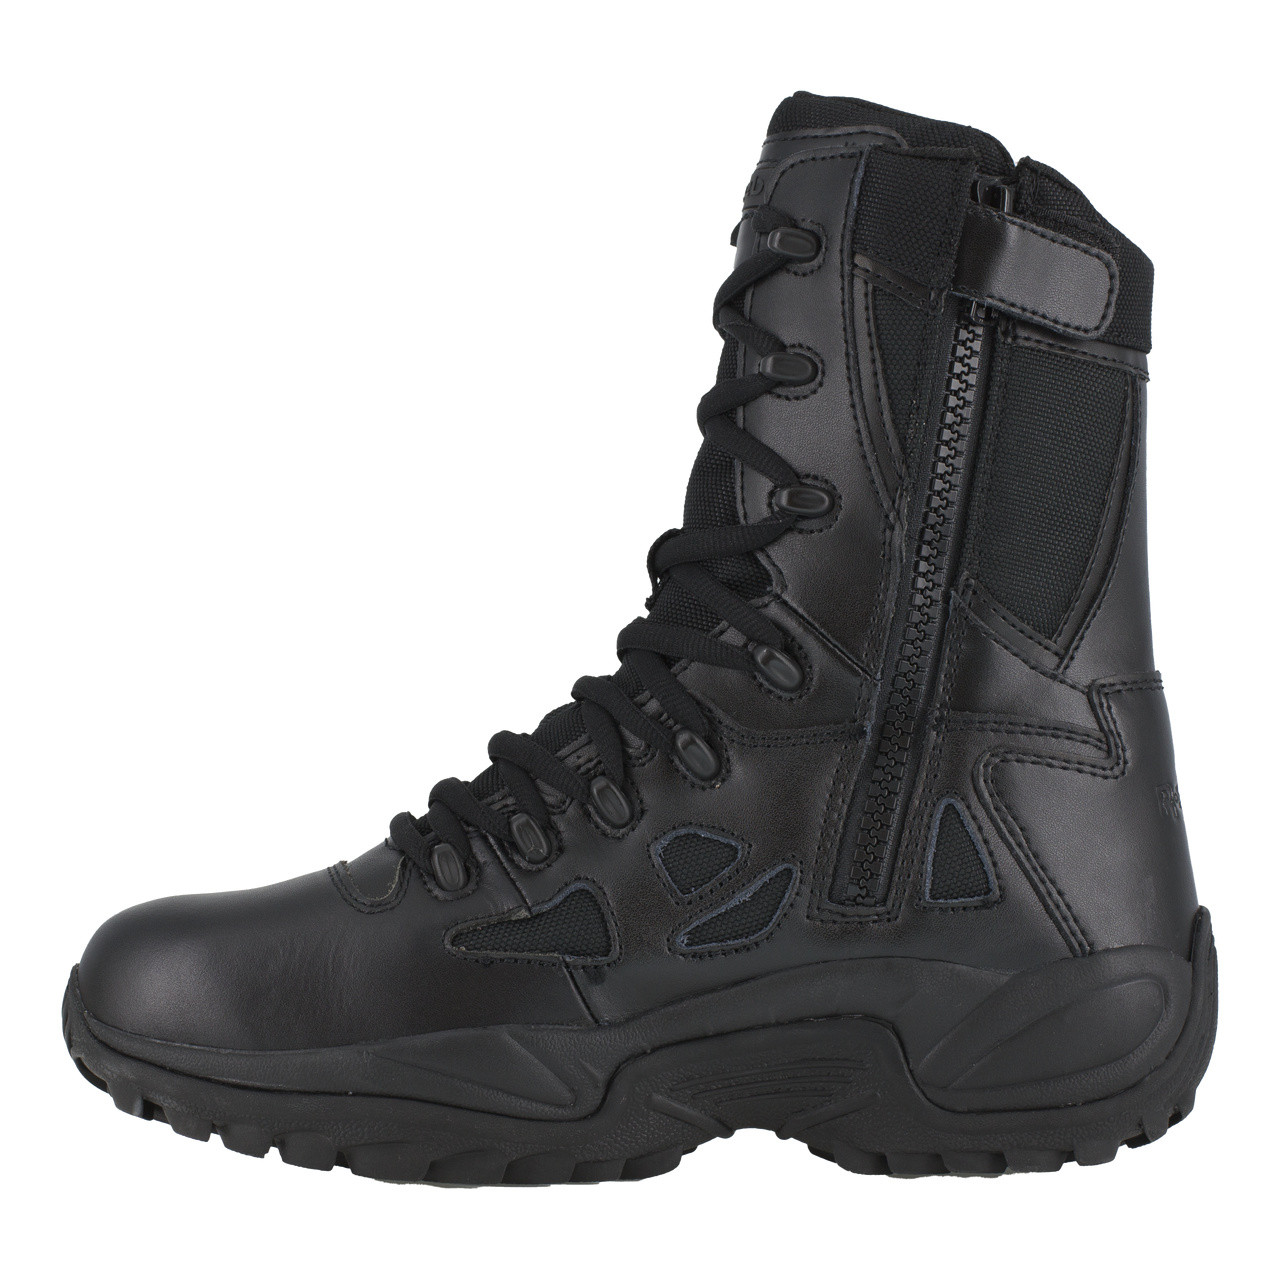 REEBOK BLACK 8" STEALTH BOOT SIDE ZIP SOFT TOE BOOTS RB8875